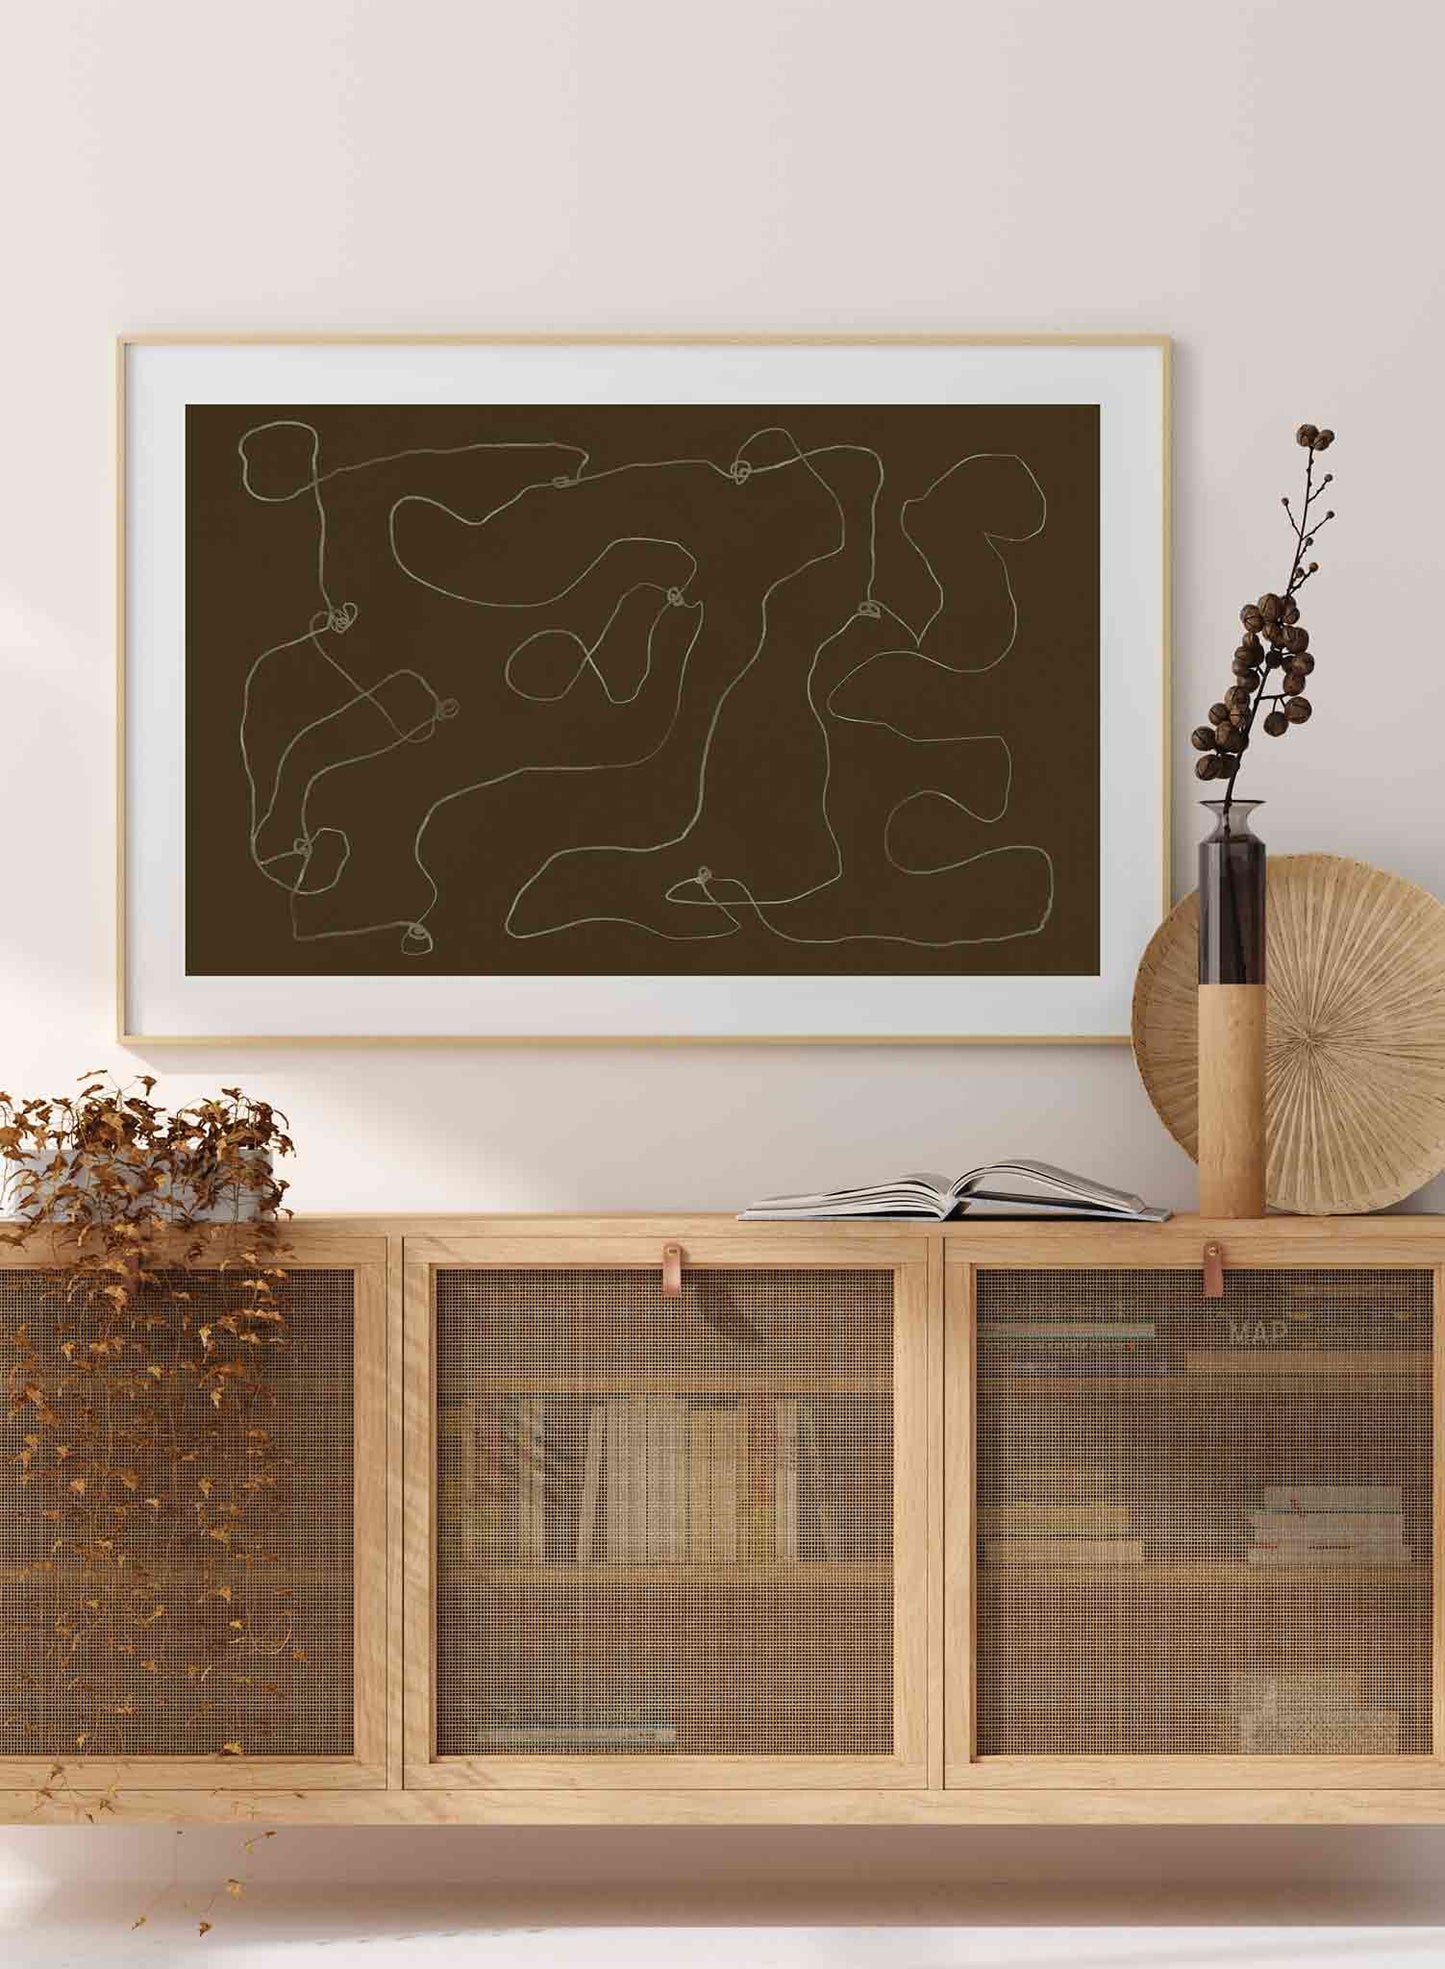 Sinuous Path is an illustration of a line path with circle points drawn in a continuous manner by Audrey Rivet in collaboration with Opposite Wall.